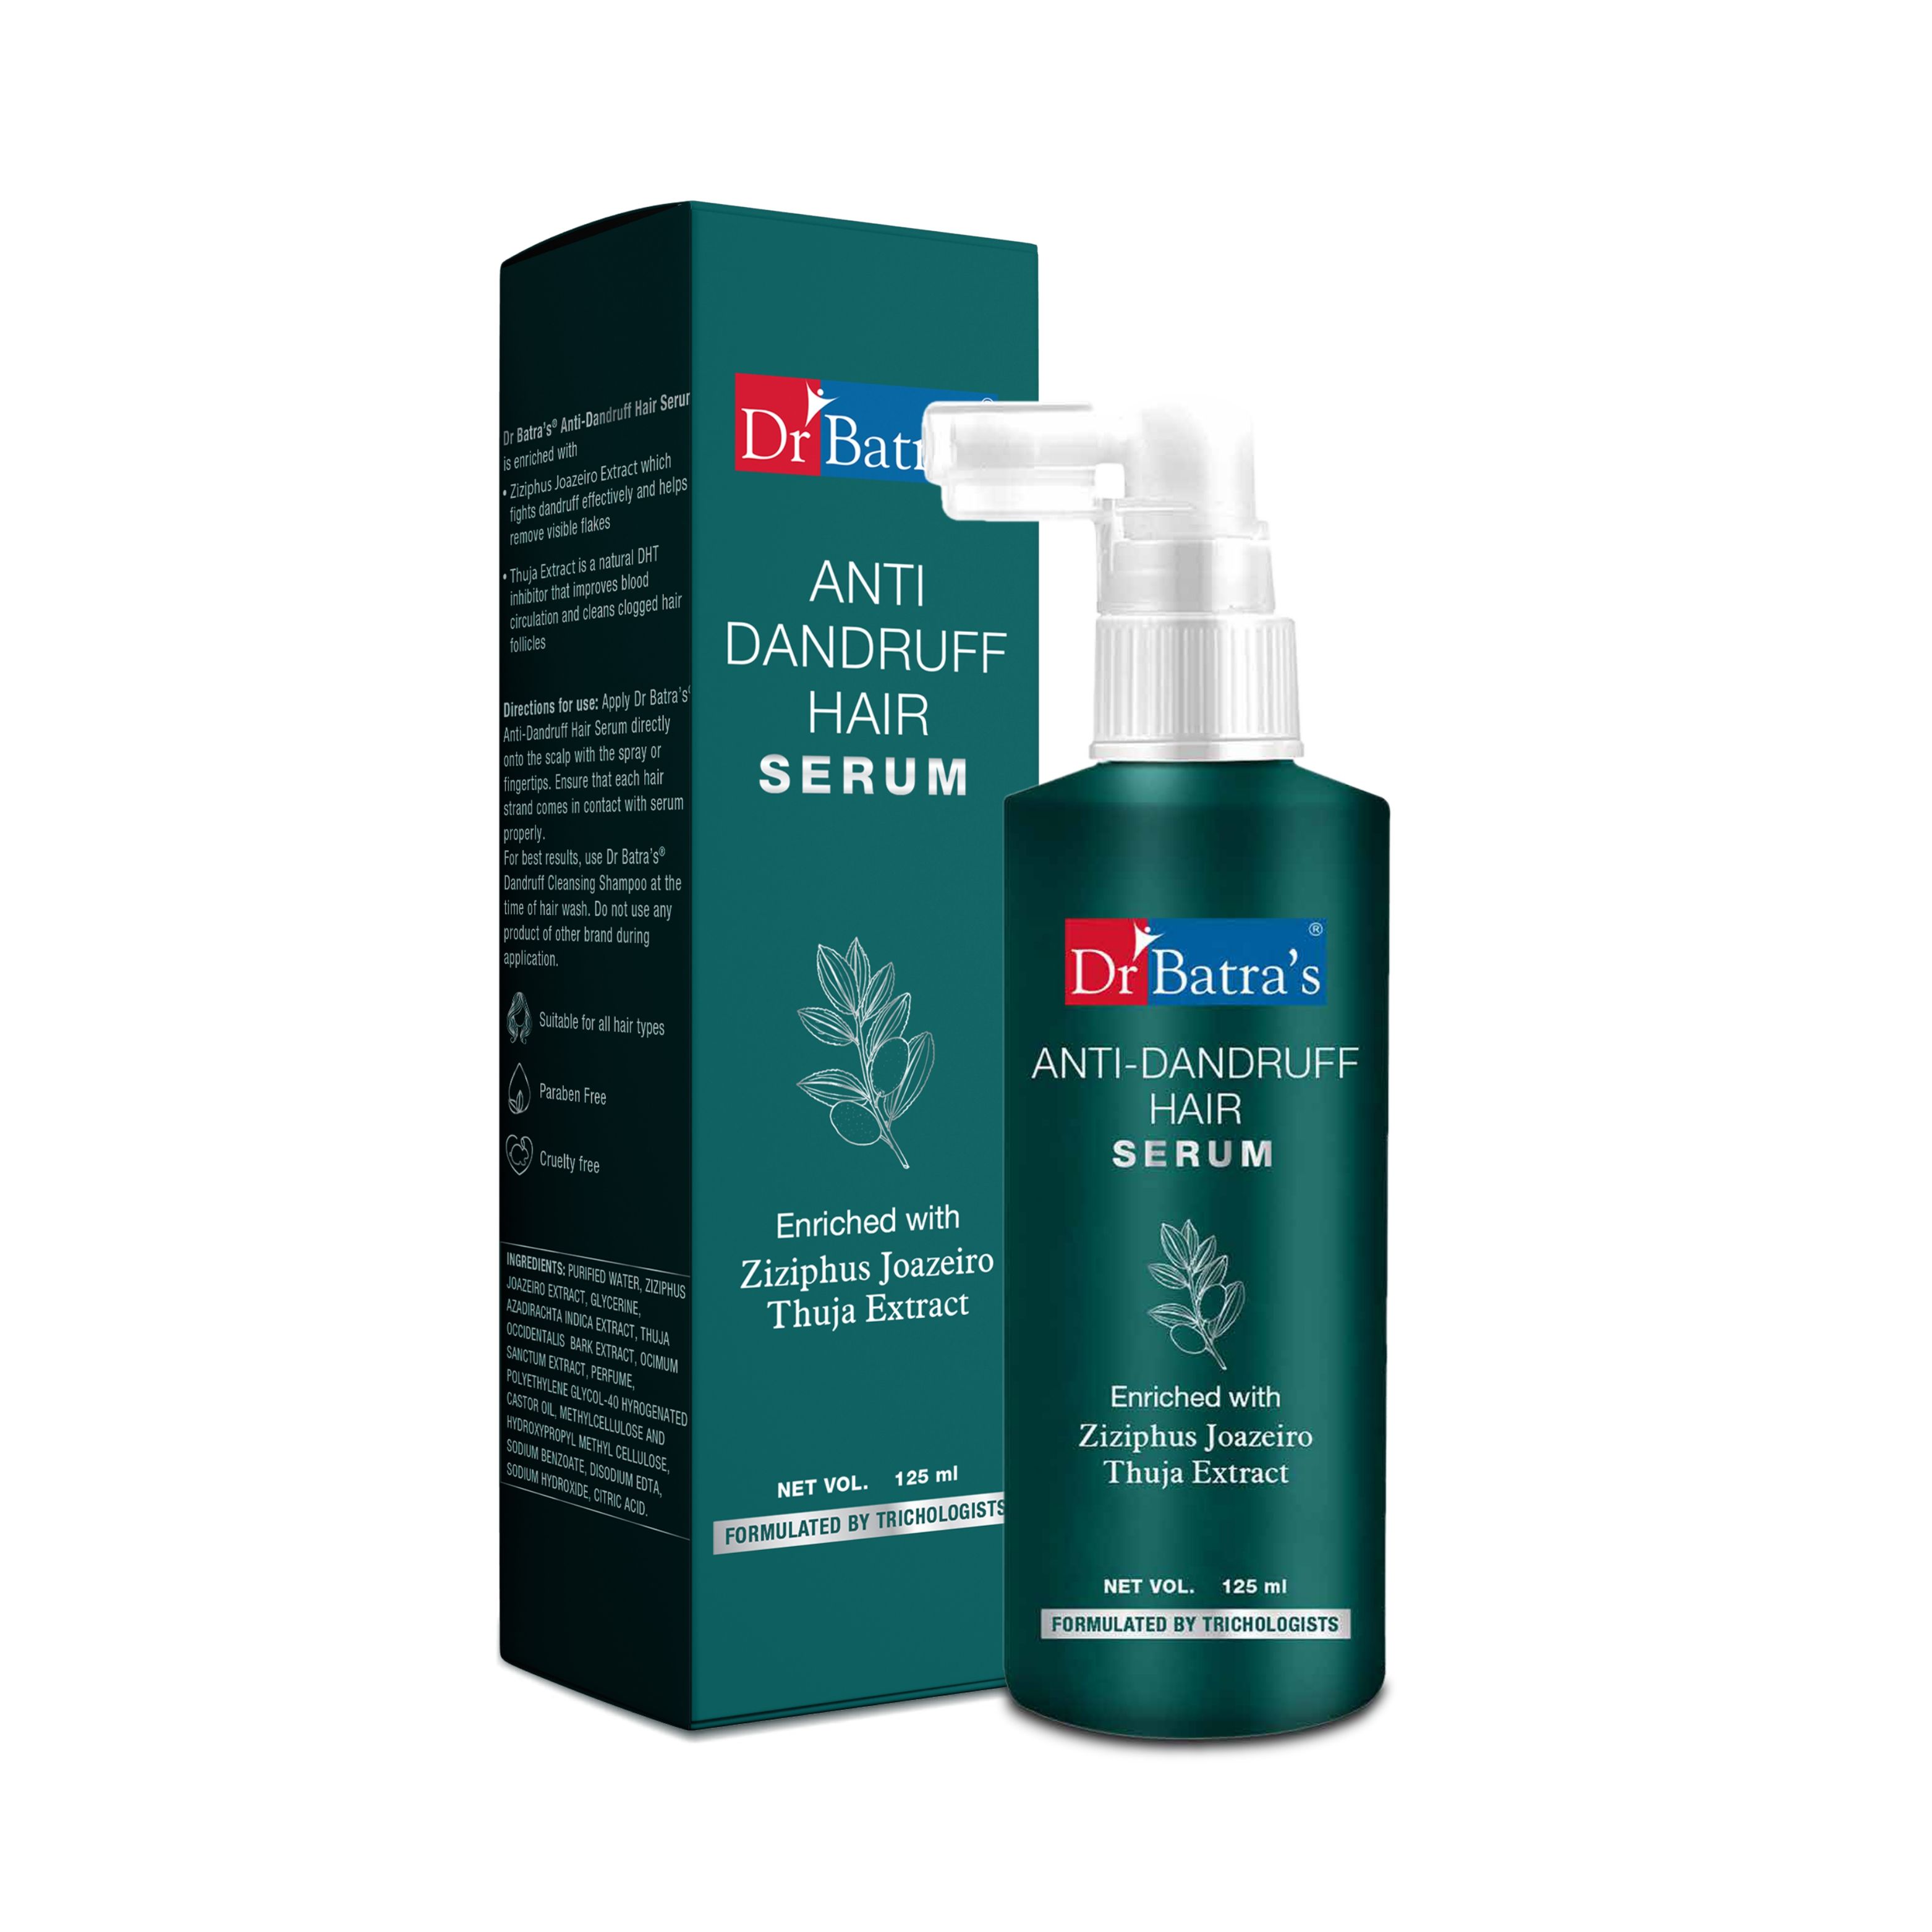 Dr Batra's Anti-Dandruff Hair Serum Enriched,Natural Extract,Thuja for Dandruff Free,Healthy Scalp